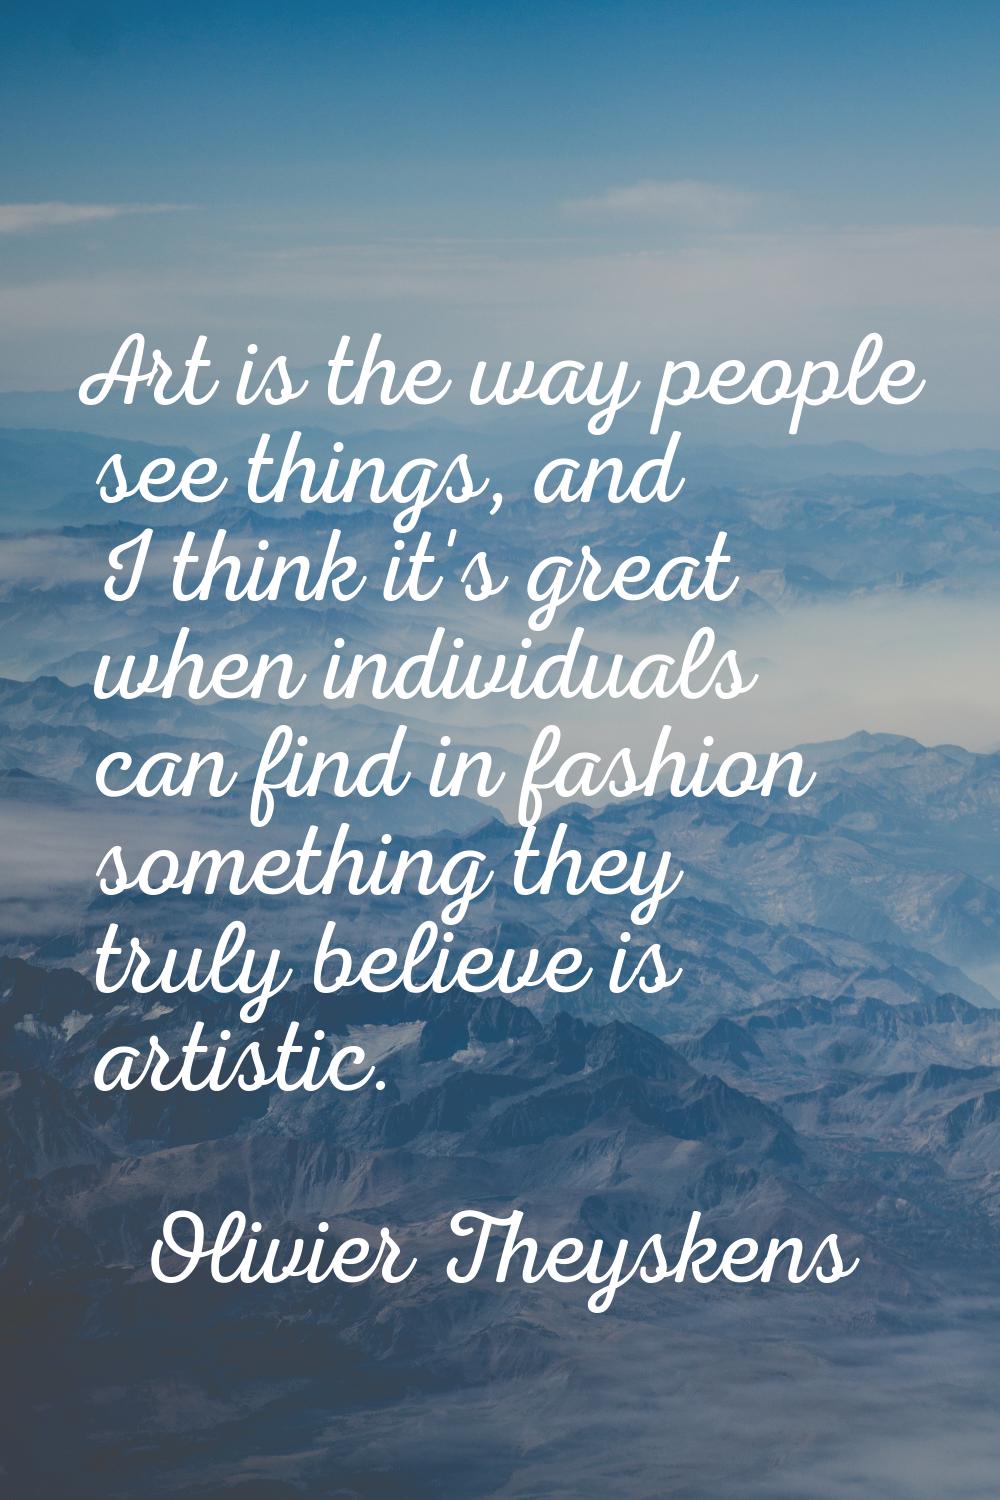 Art is the way people see things, and I think it's great when individuals can find in fashion somet